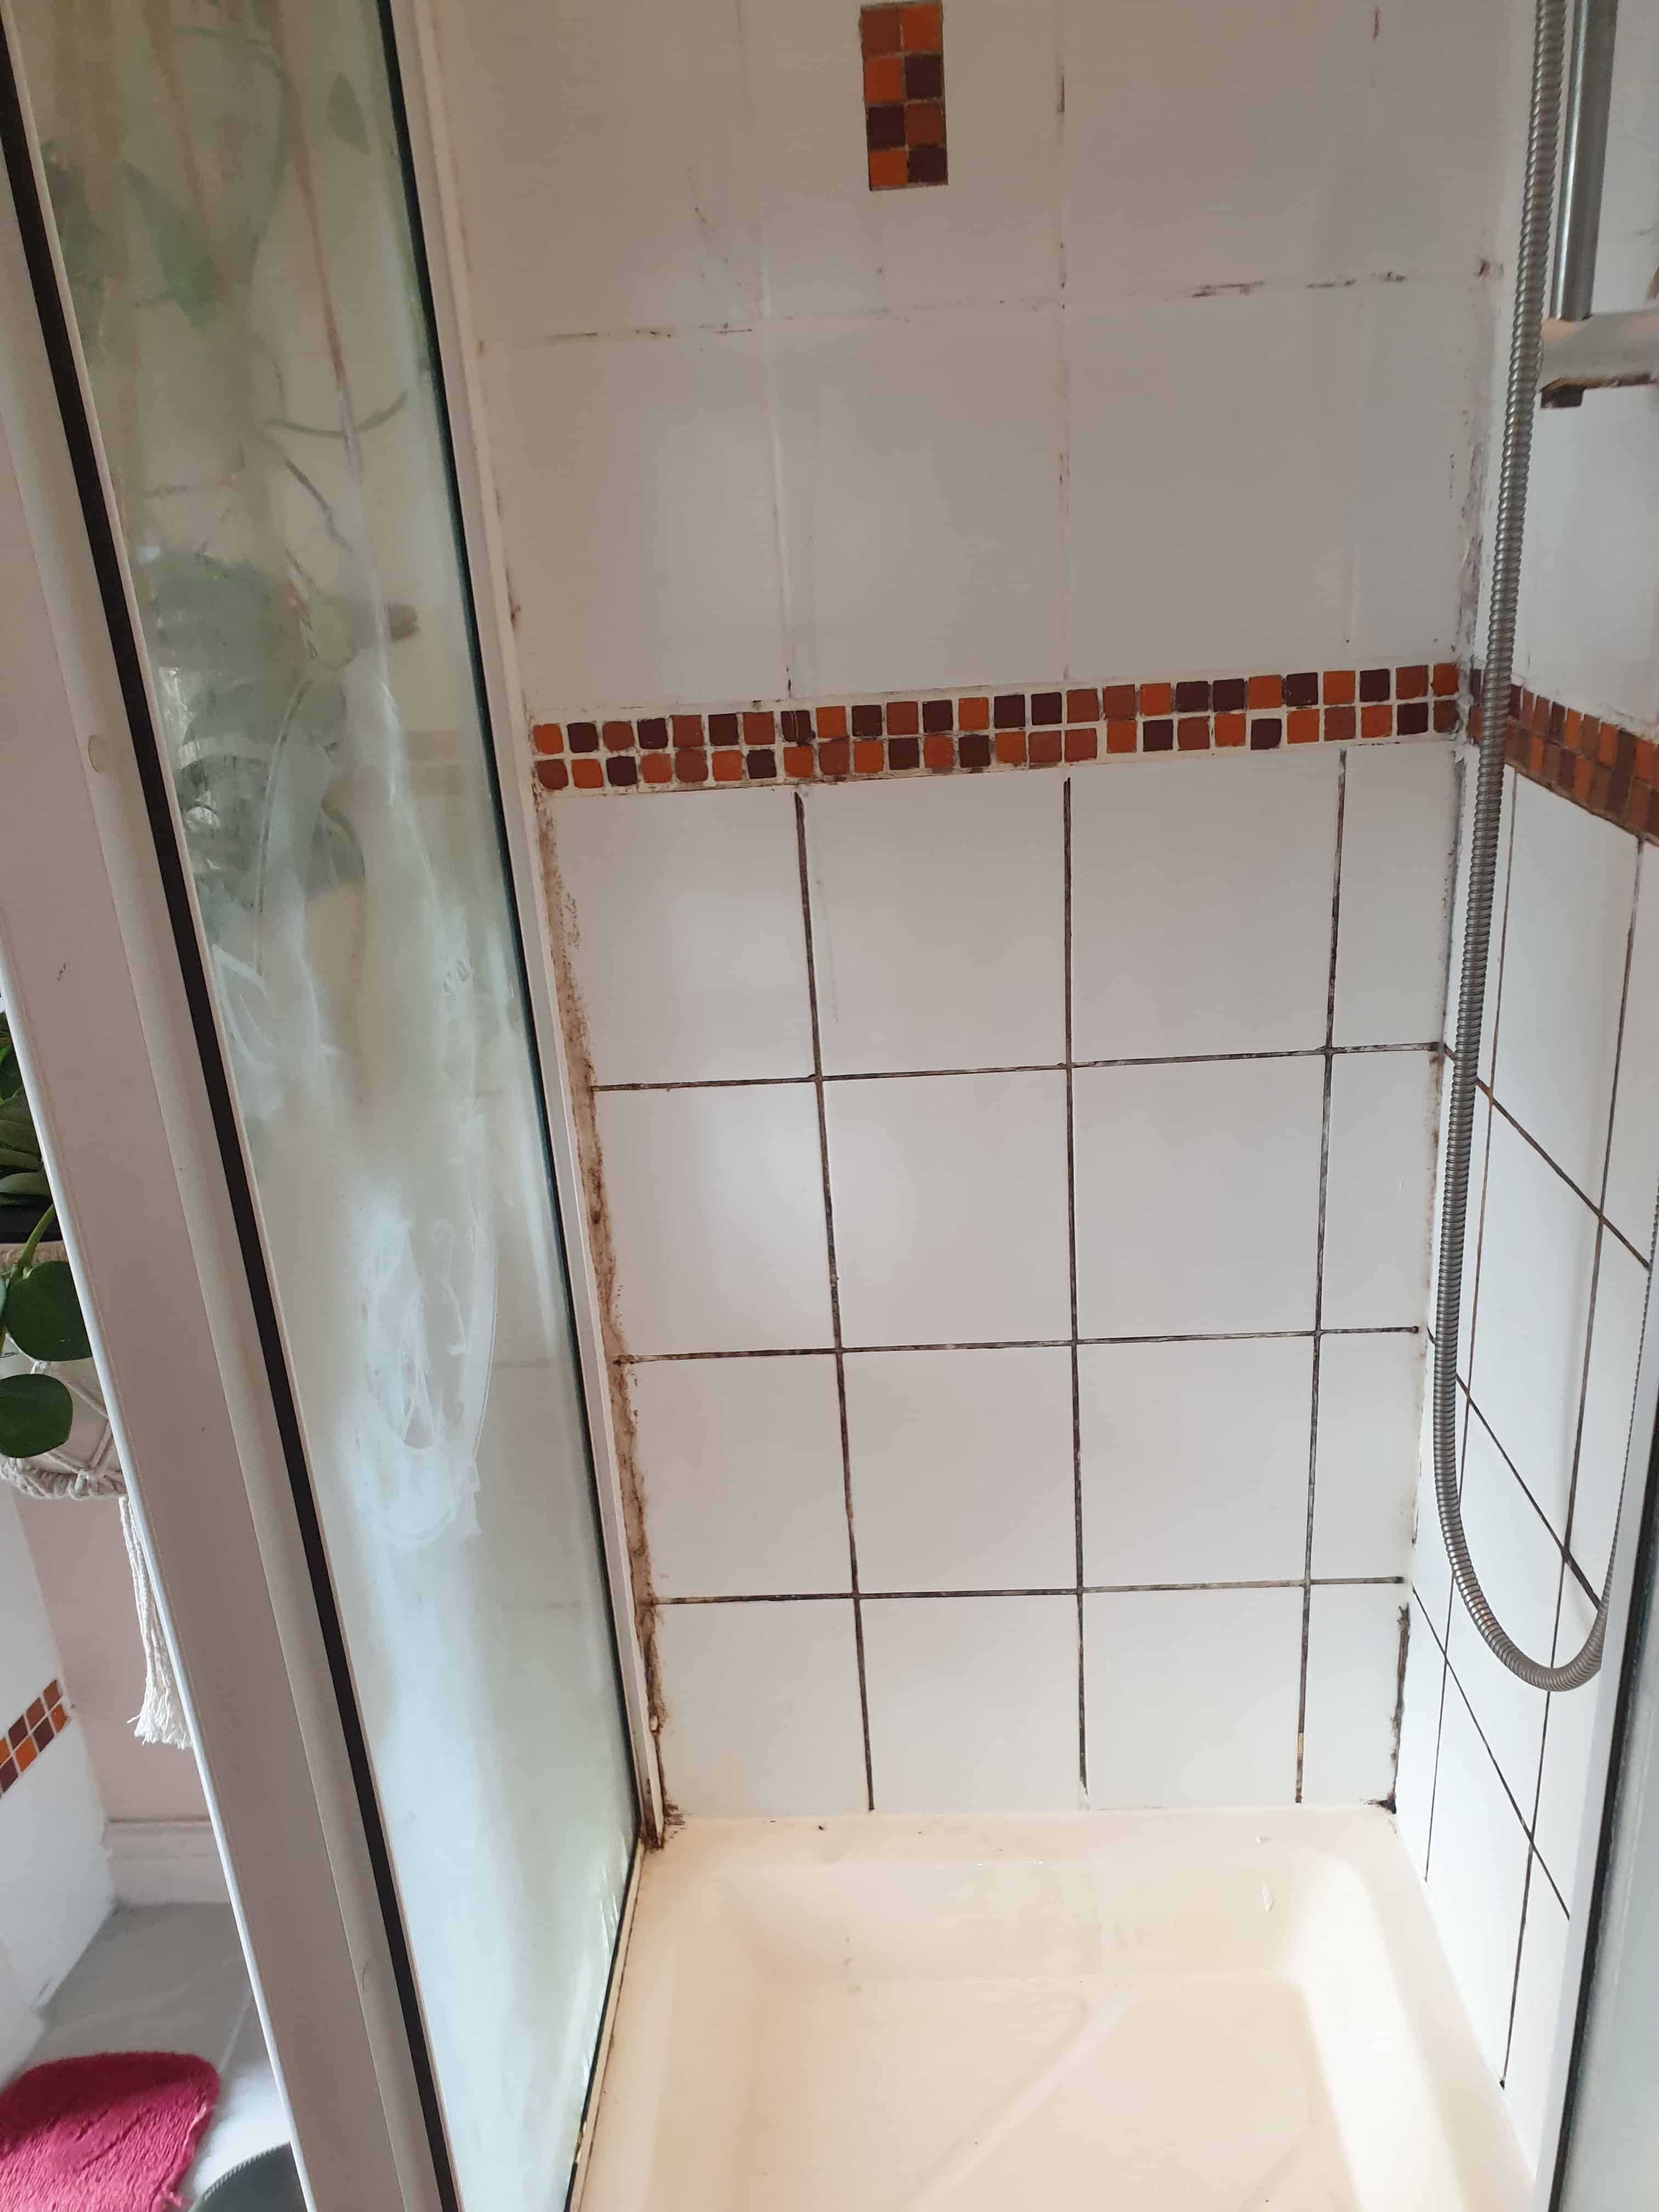 Ceramic Shower Cubicle Tile Grout Before Cleaning Lower Whitley